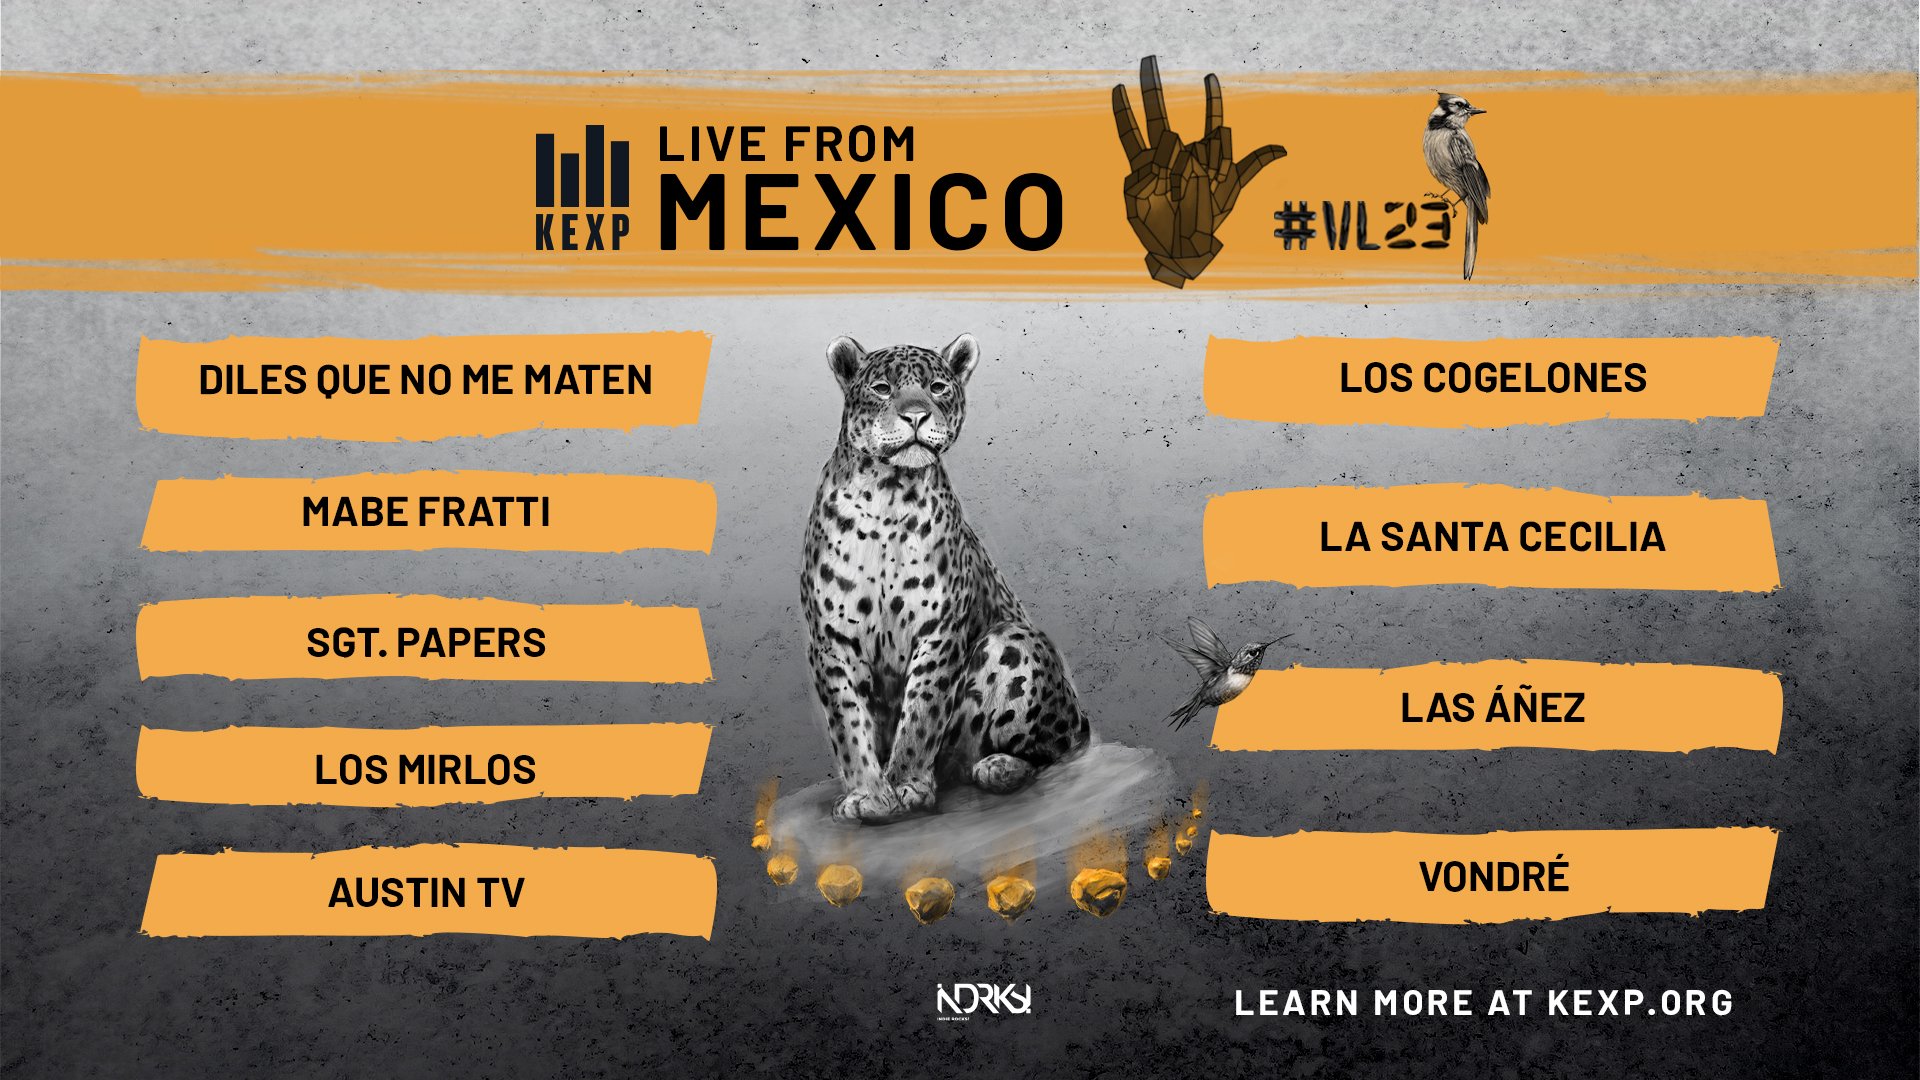 kexp-live-from-mexico-vl-1920x1080-gs.jpg__1920x1080_q85_crop_subsampling-2_upscale